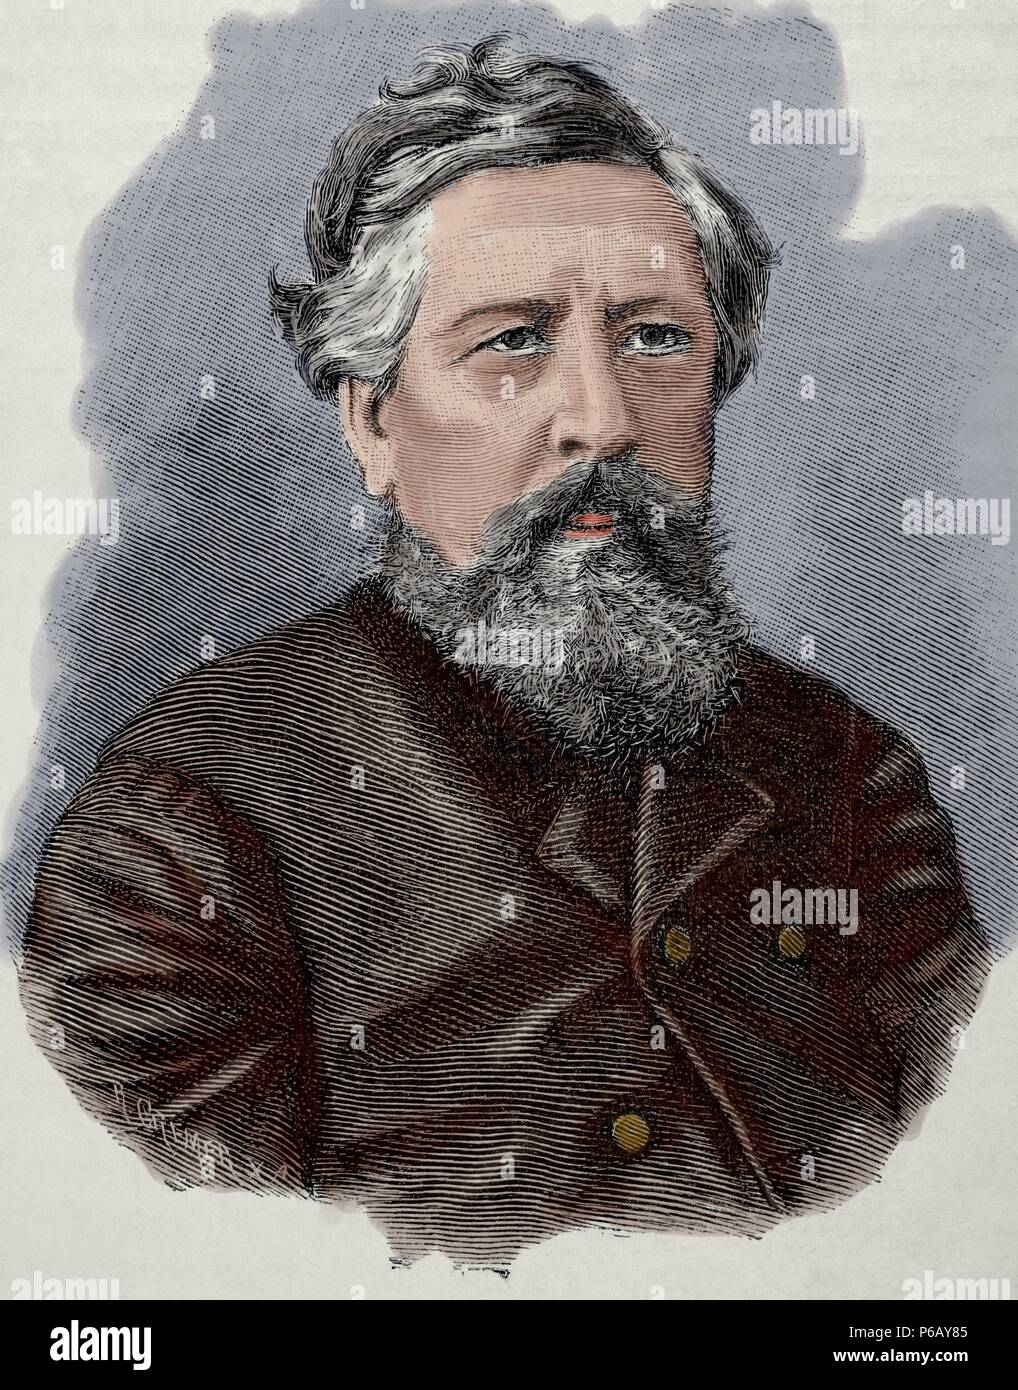 Wilhelm Liebknecht (1826-1900). German social democrat and one of the principal founders of the SPD. Engraving by 'Universal History', 1885. Colored. Stock Photo